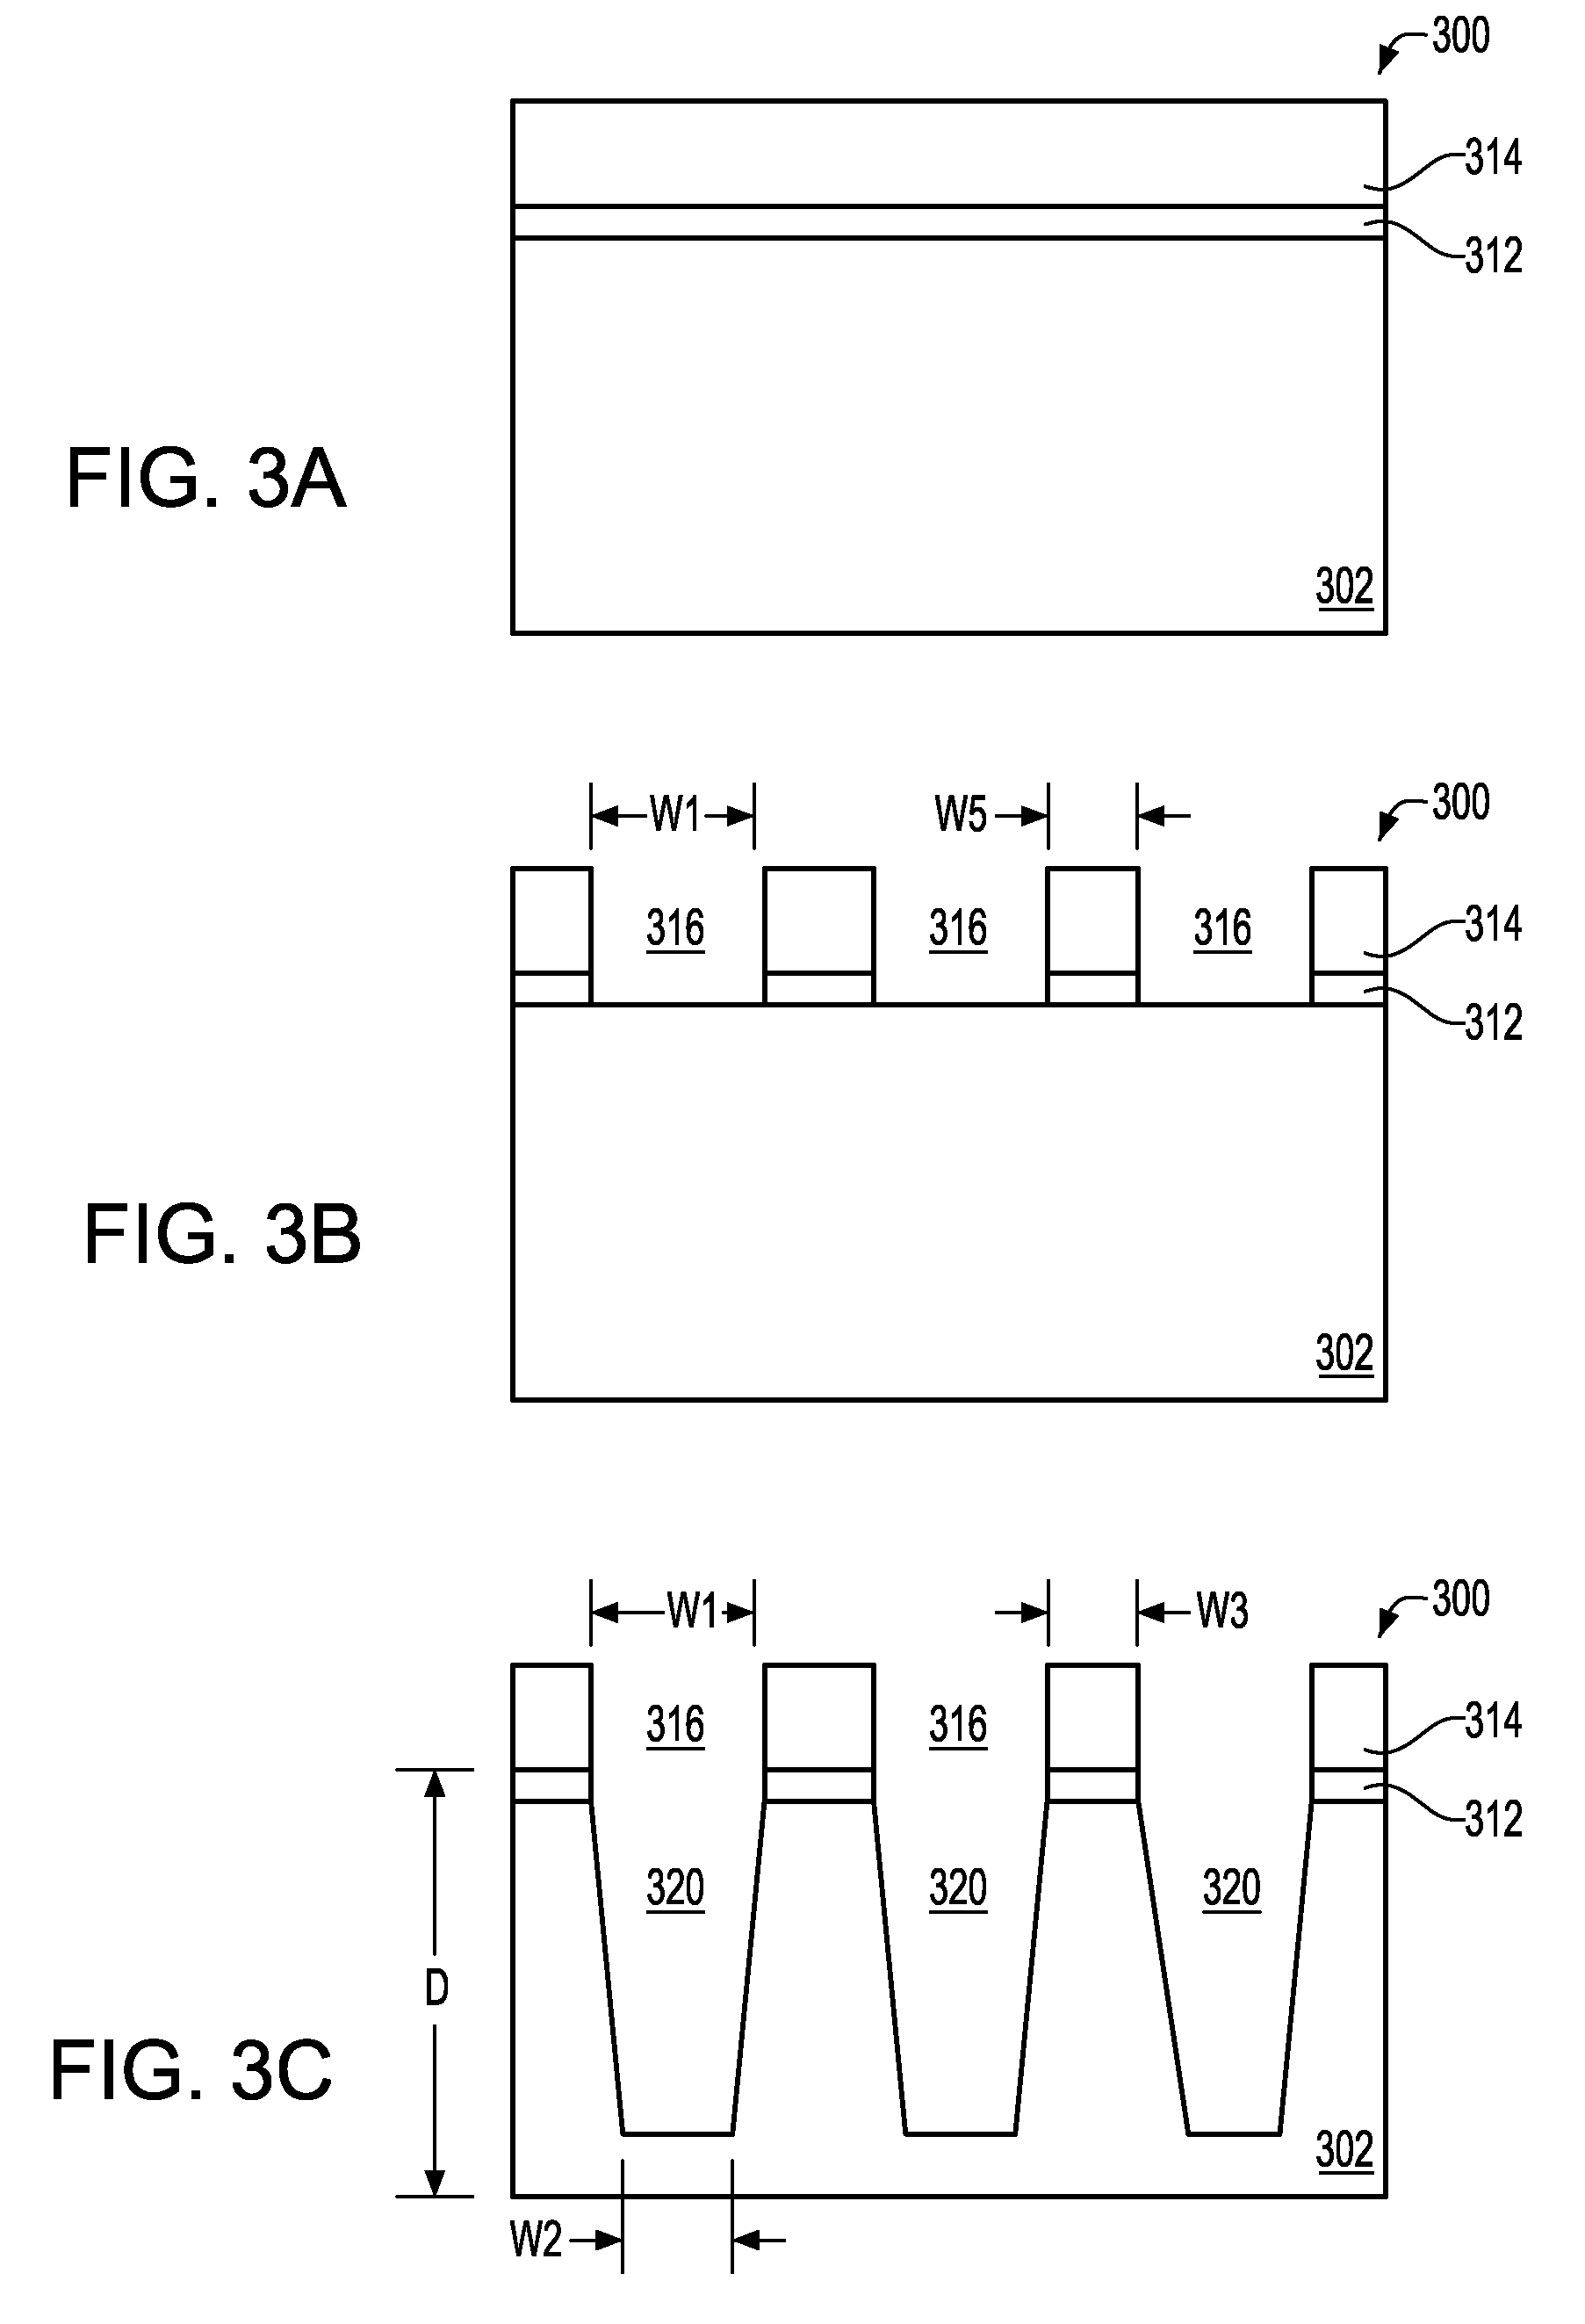 Method to increase effective MOSFET width